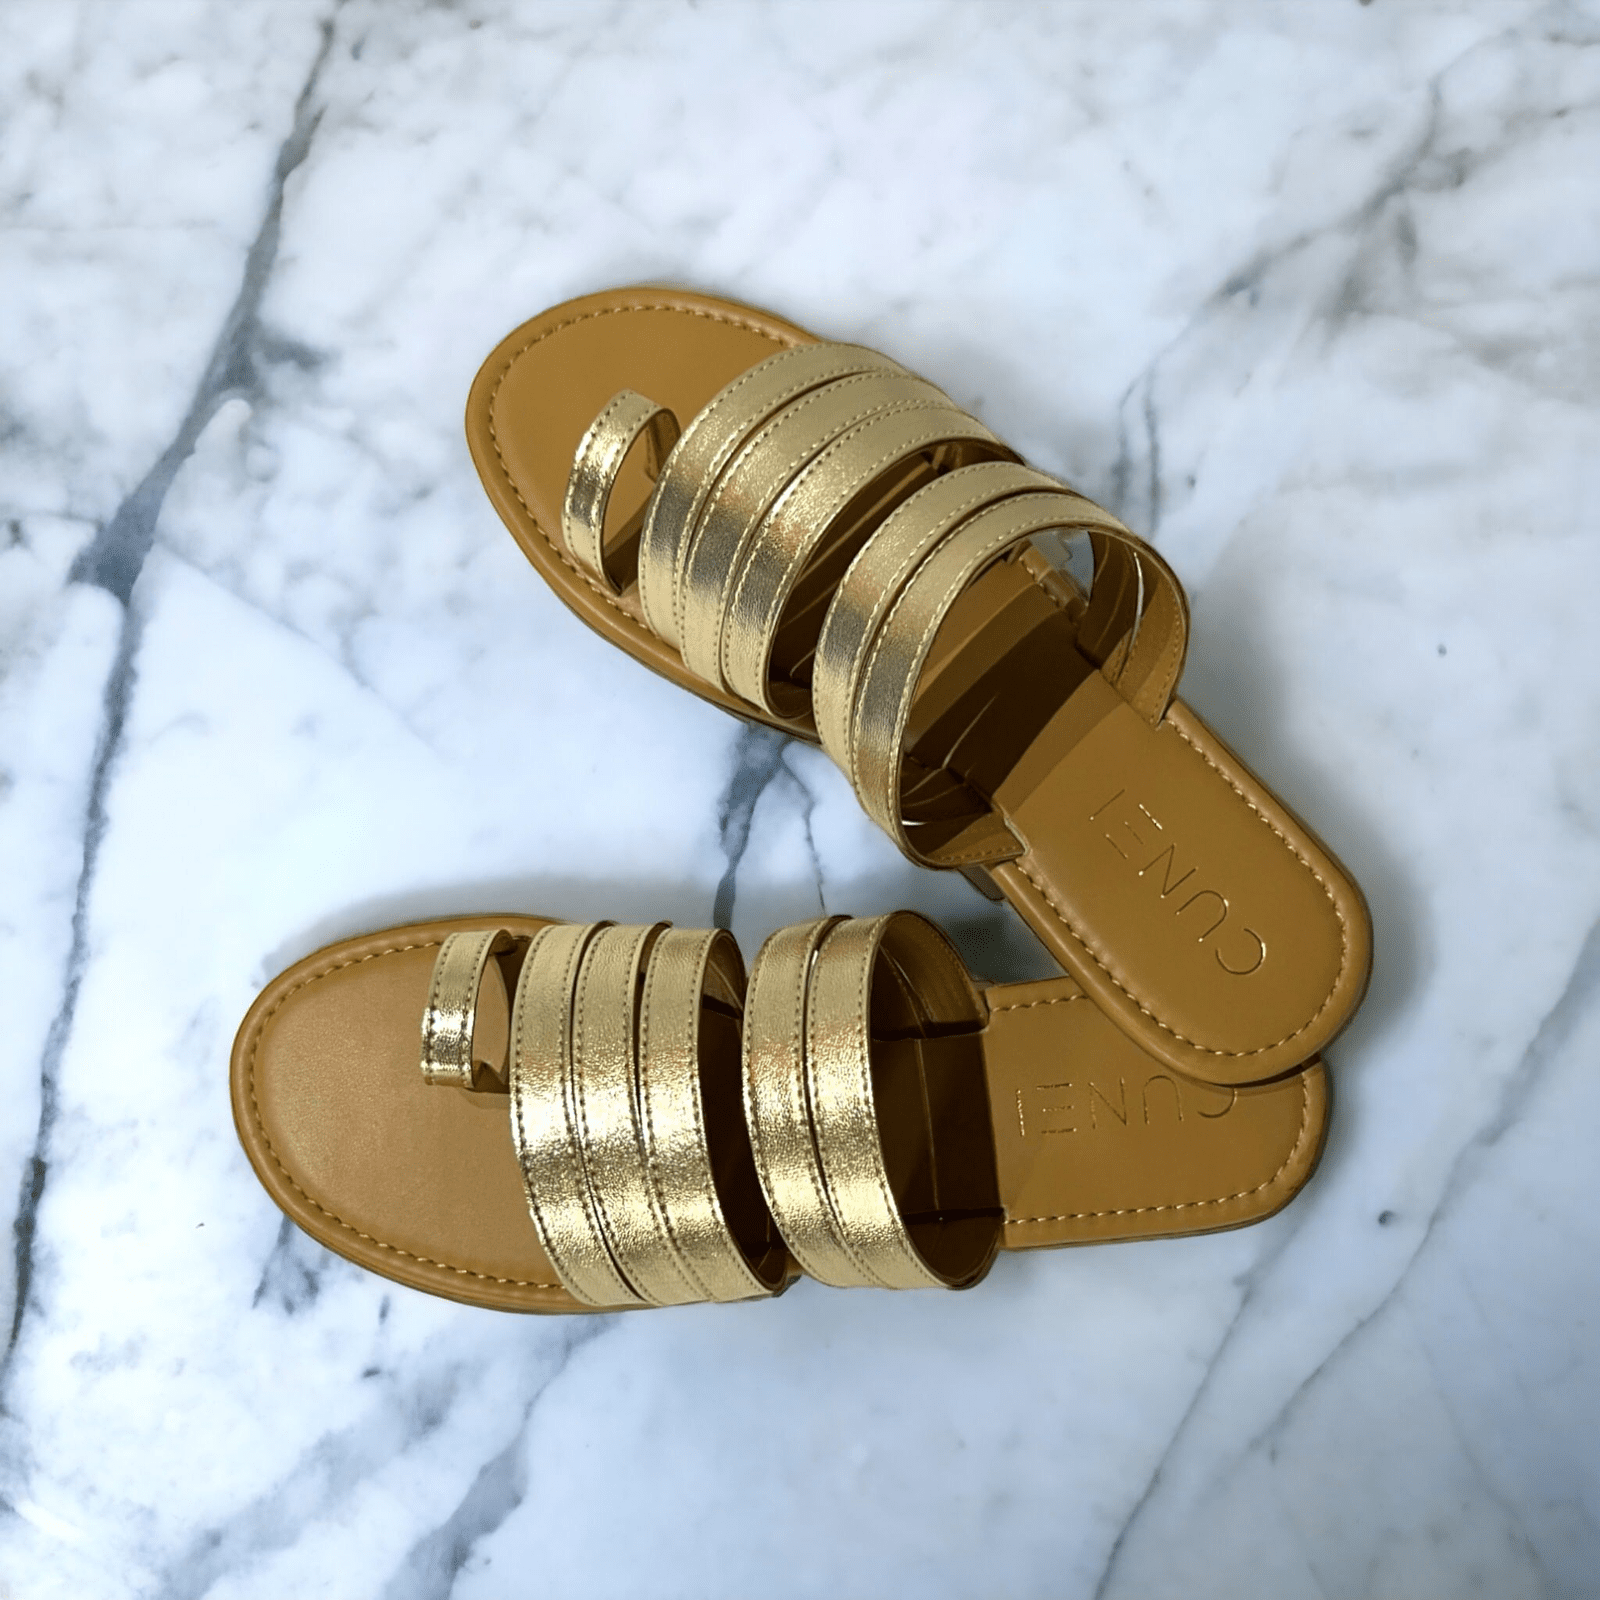 Wear It The Gladiator Style | Fashion in India - Threads